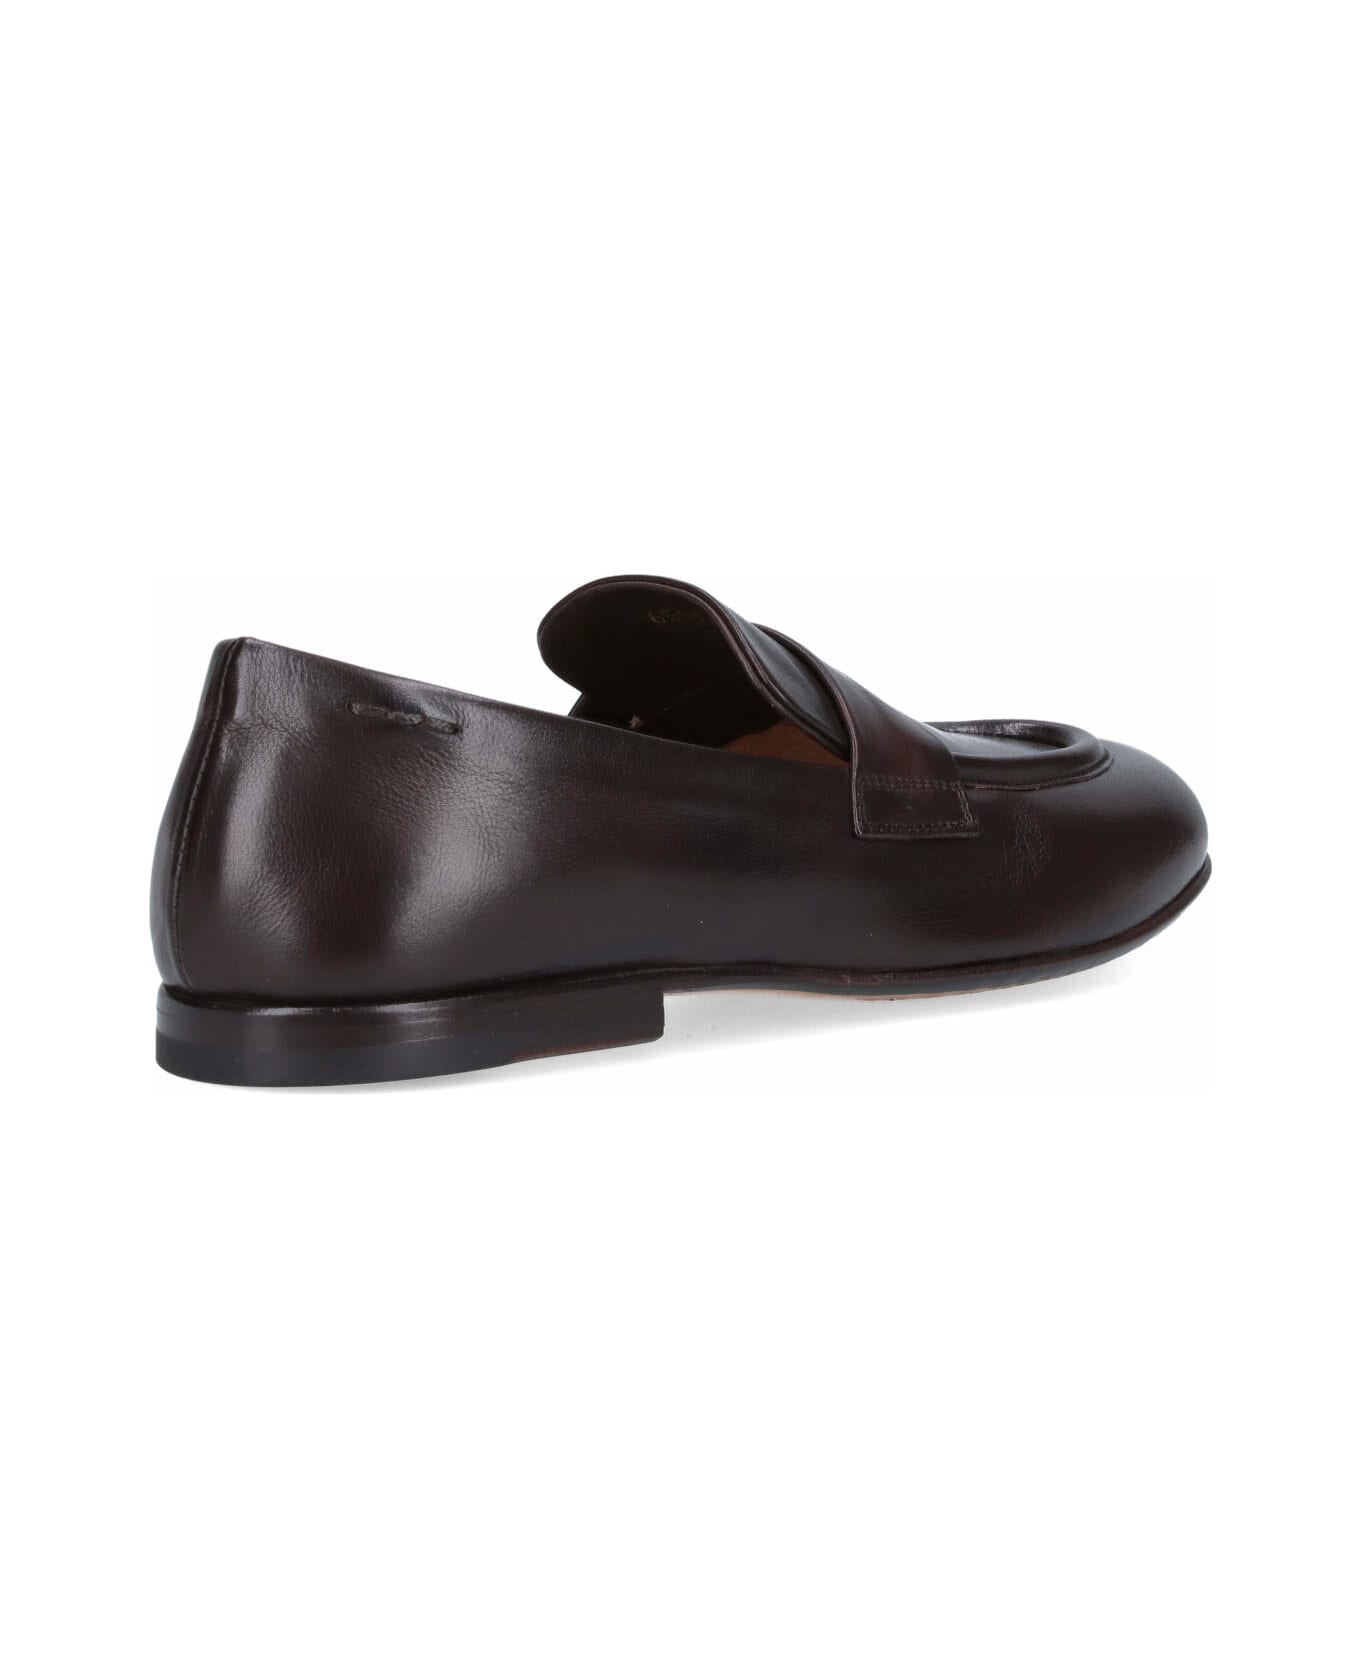 Alexander Hotto Classic Loafers - Brown